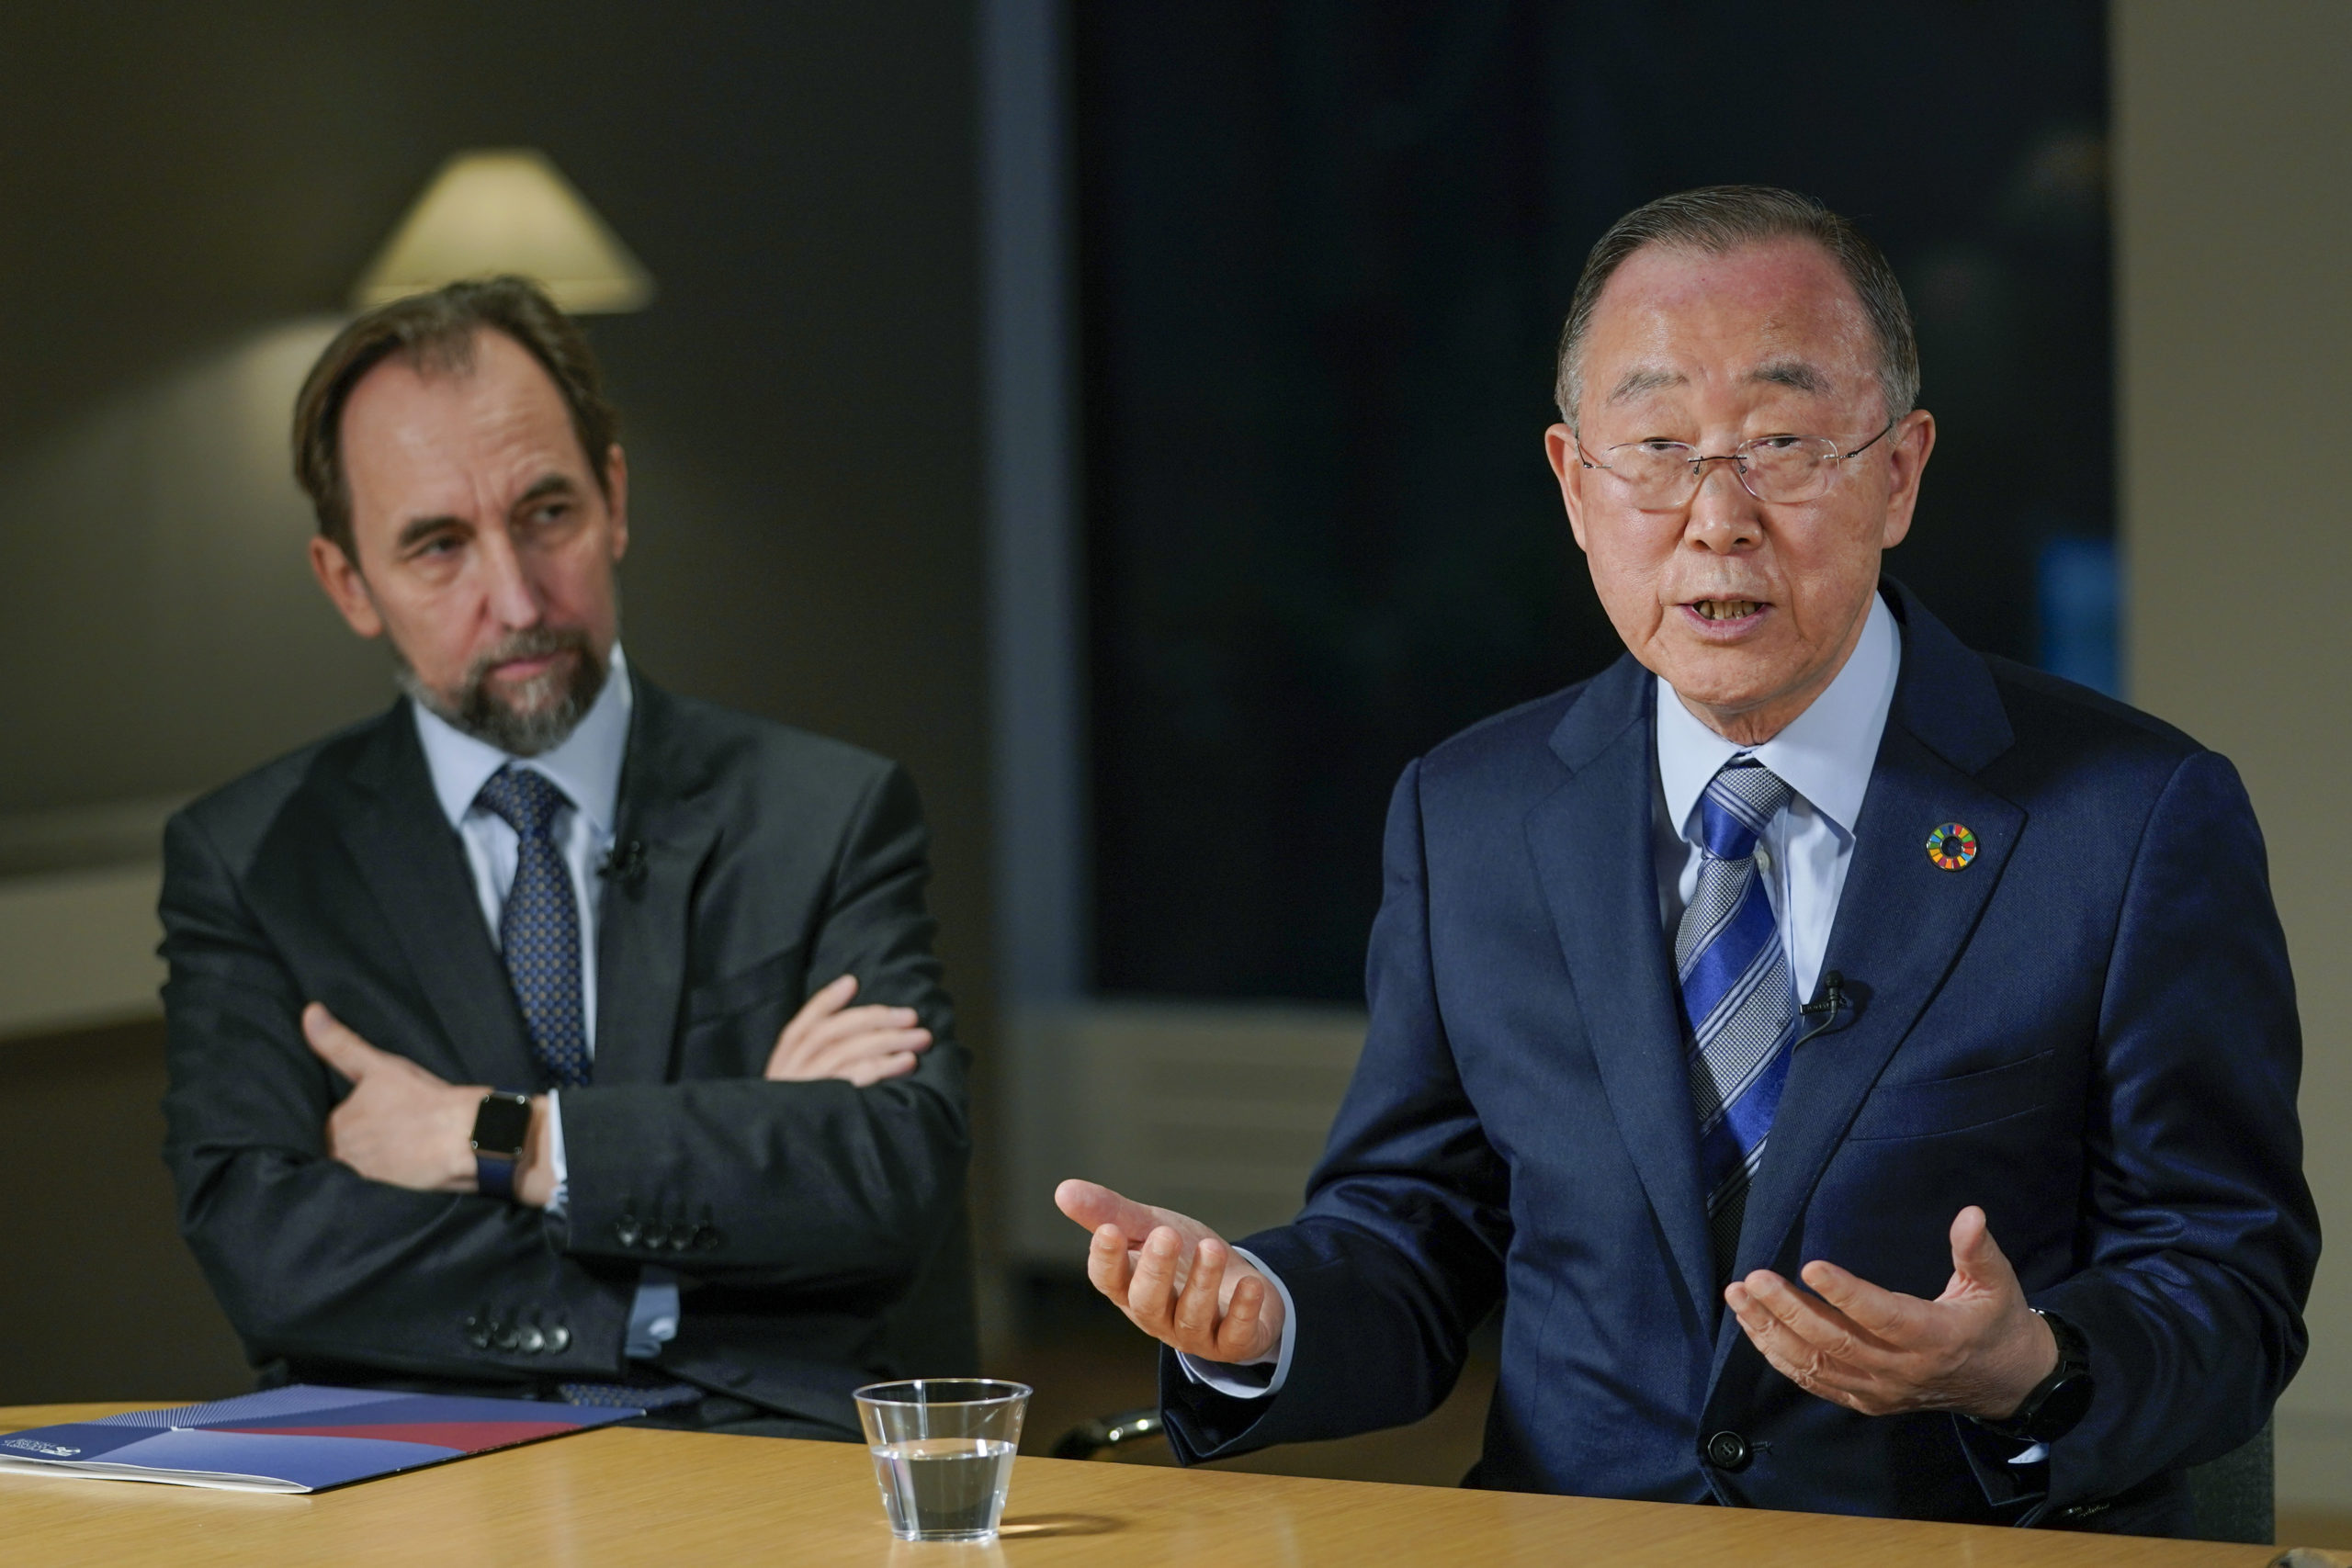 Former United Nations Secretary-General Ban Ki-moon, right, is joined by Zeid Raad Al Hussein, left, as he speaks during an interview with The Associated Press in New York City on Friday.